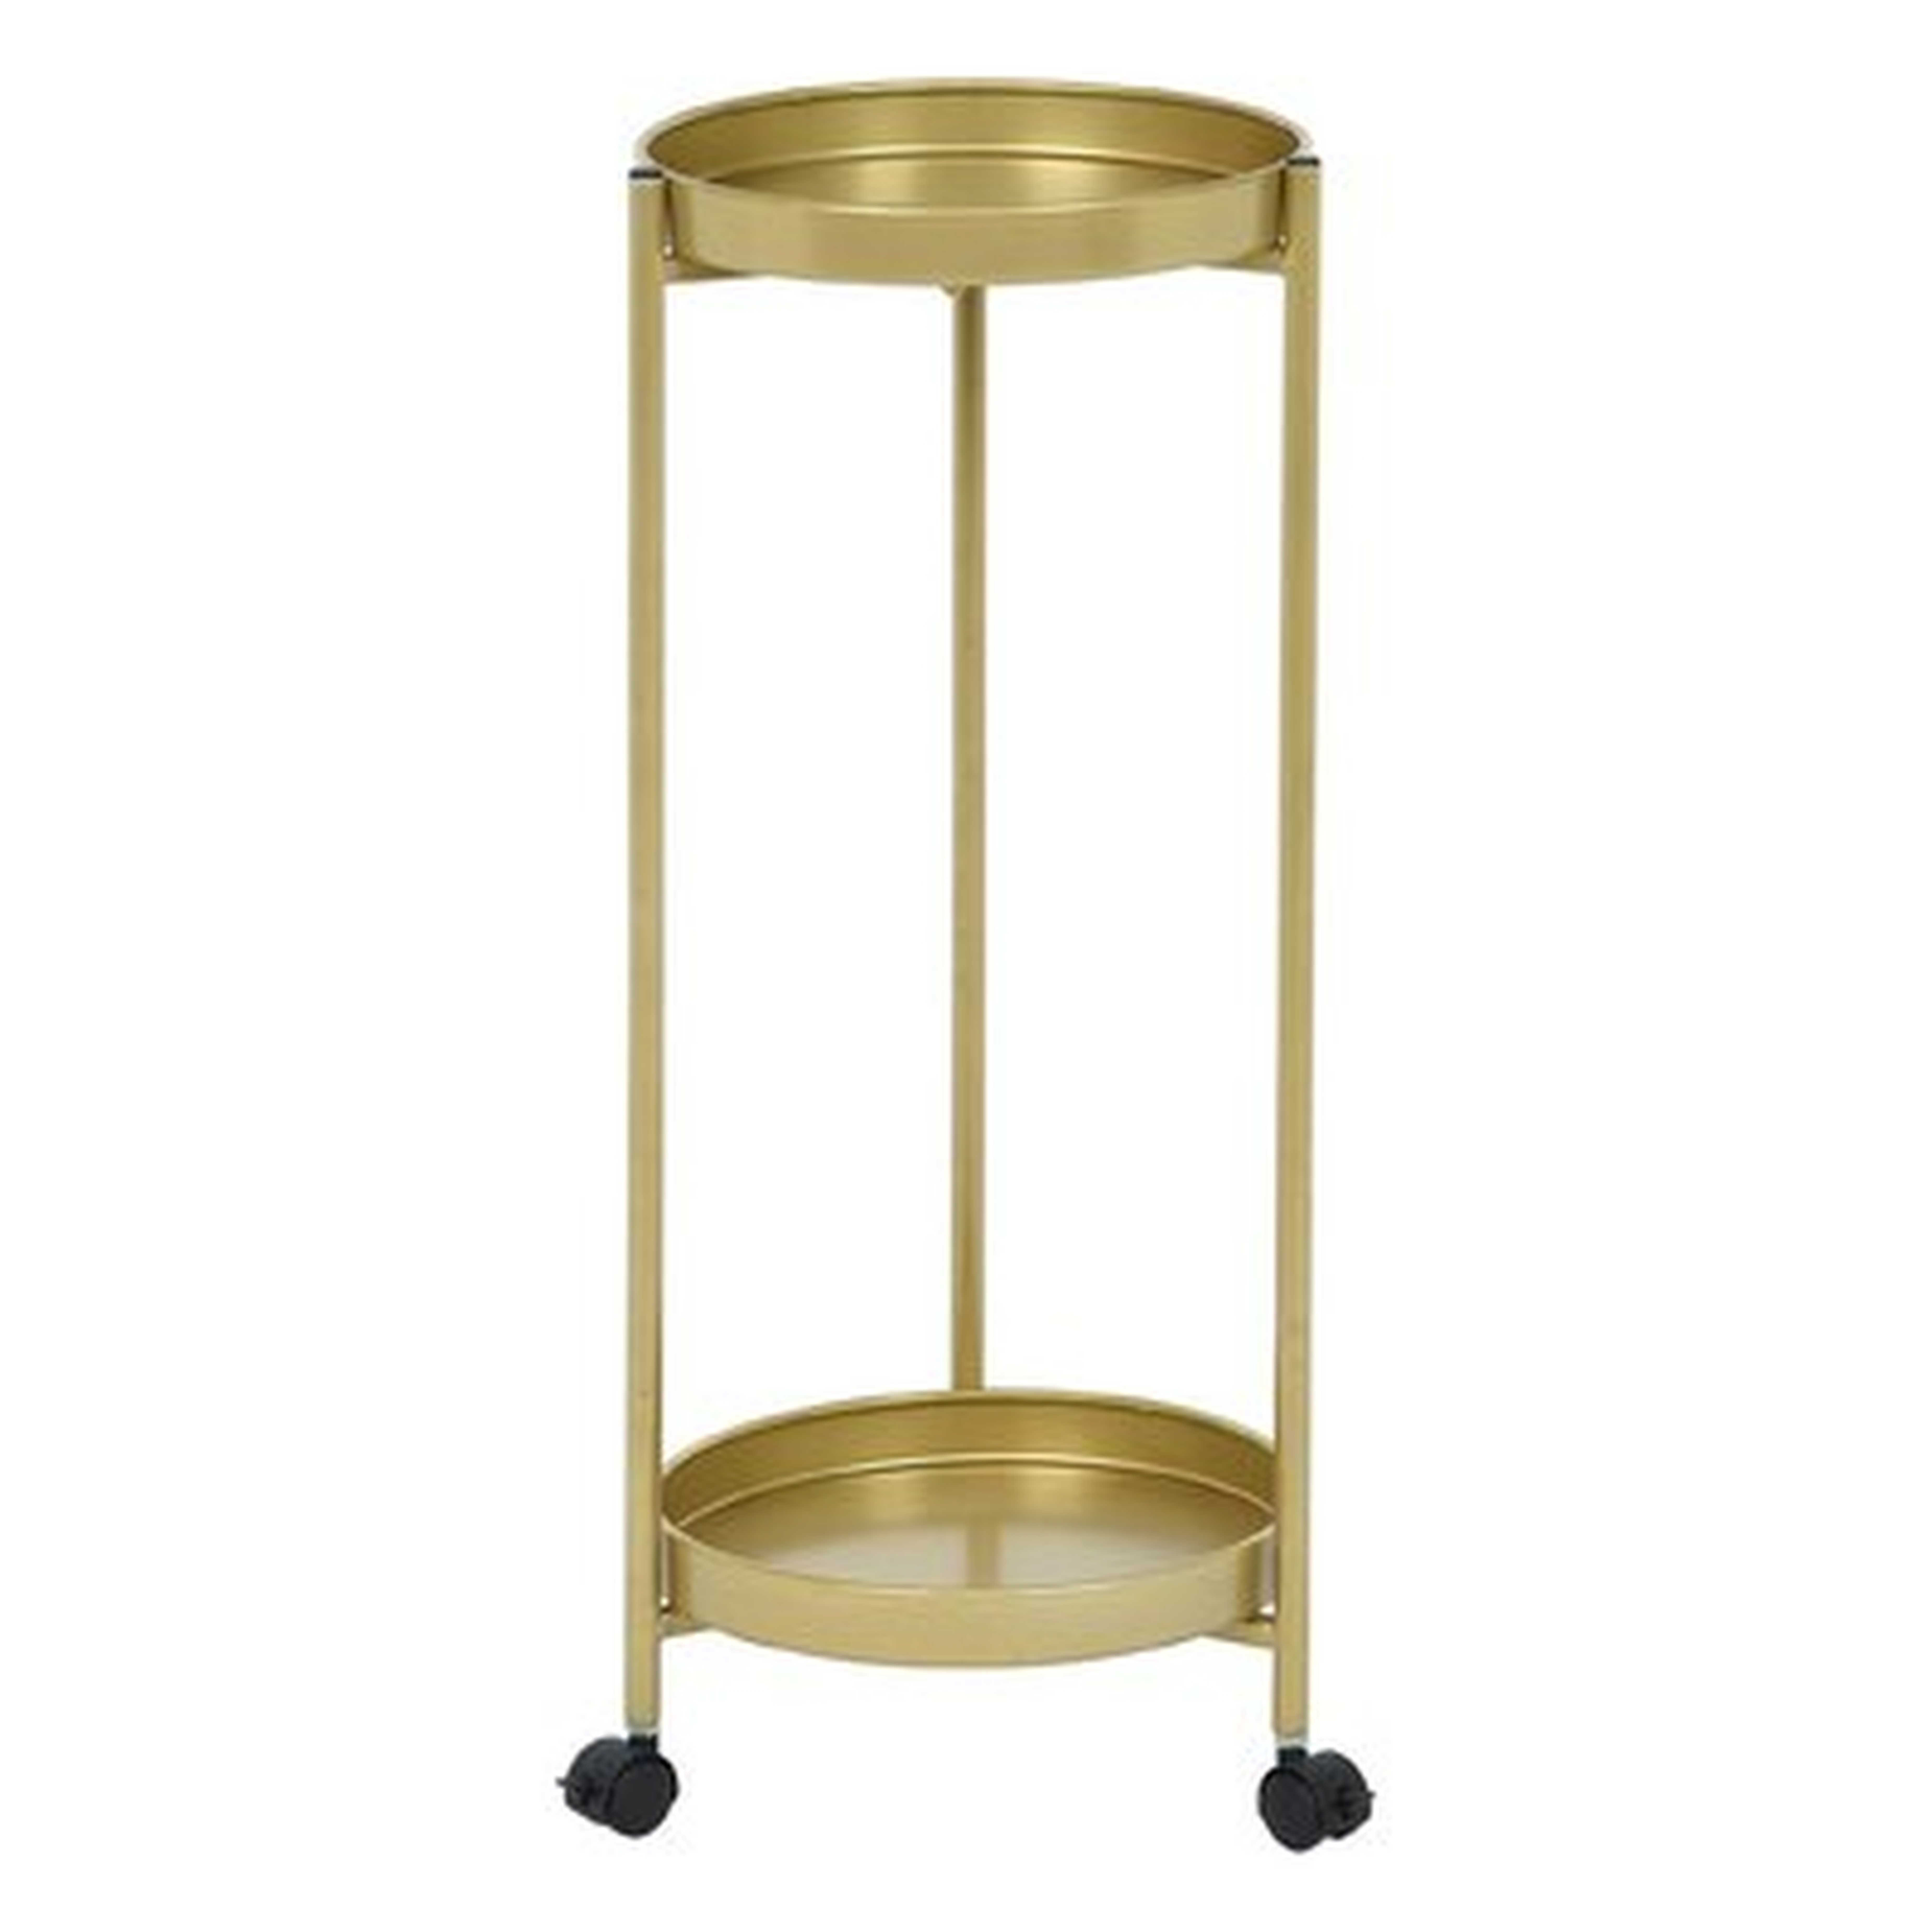 Metal Potted Plant Stand - Wayfair